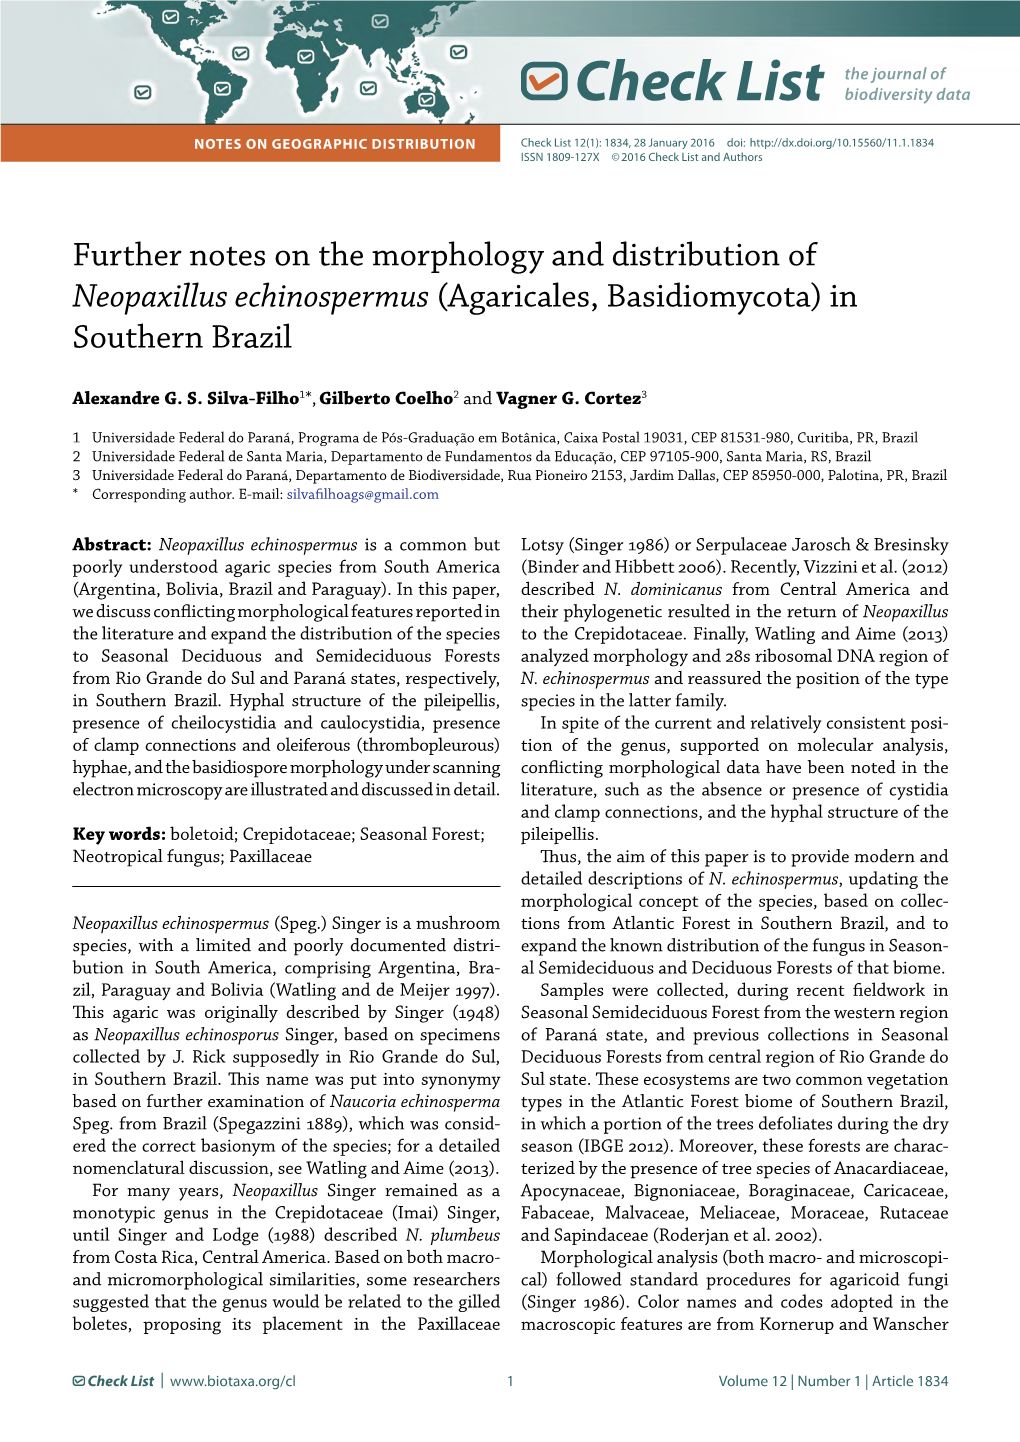 Further Notes on the Morphology and Distribution of Neopaxillus Echinospermus (Agaricales, Basidiomycota) in Southern Brazil